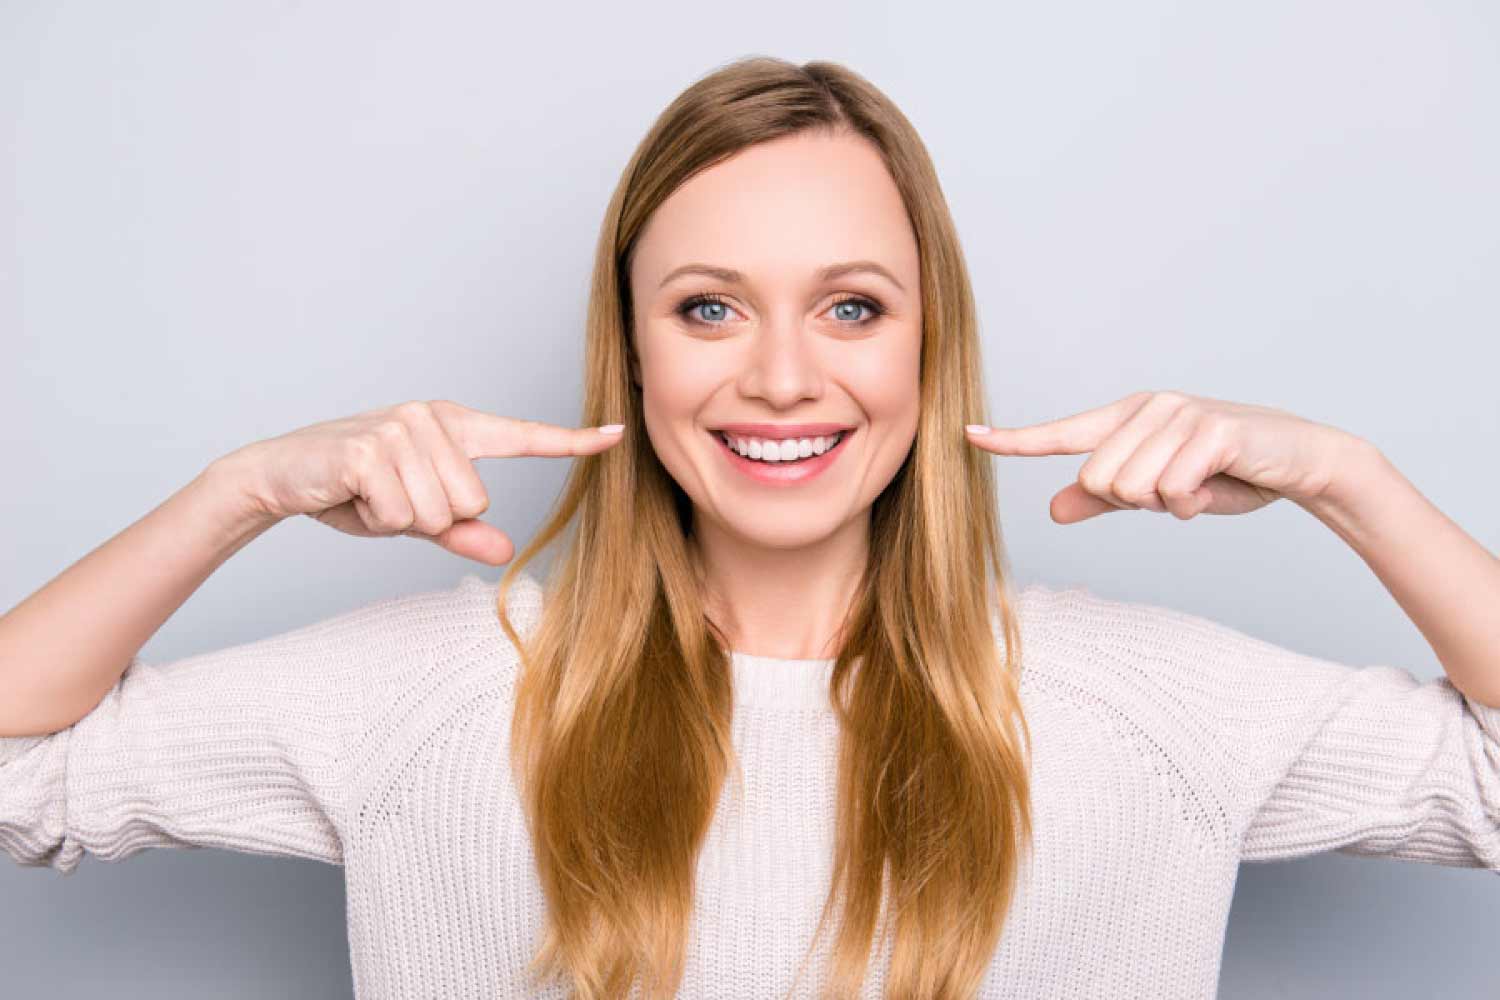 Smiling woman points to her while teeth.